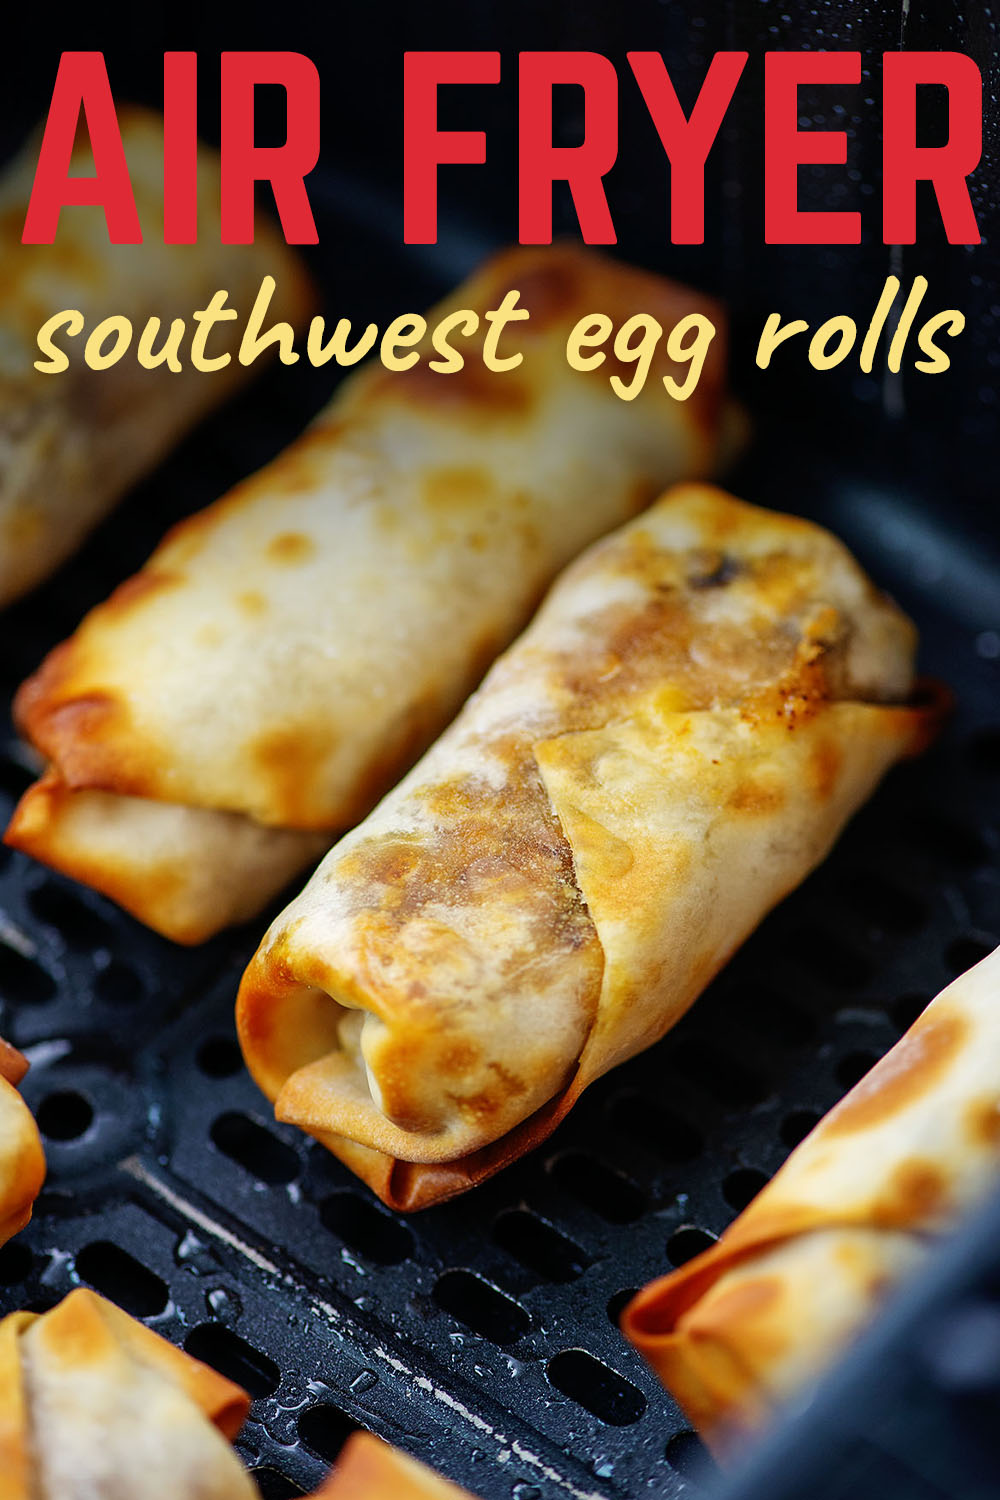 Our Southwest chicken egg rolls aren't too spicy for a gathering, and super easy to make in the air fryer!